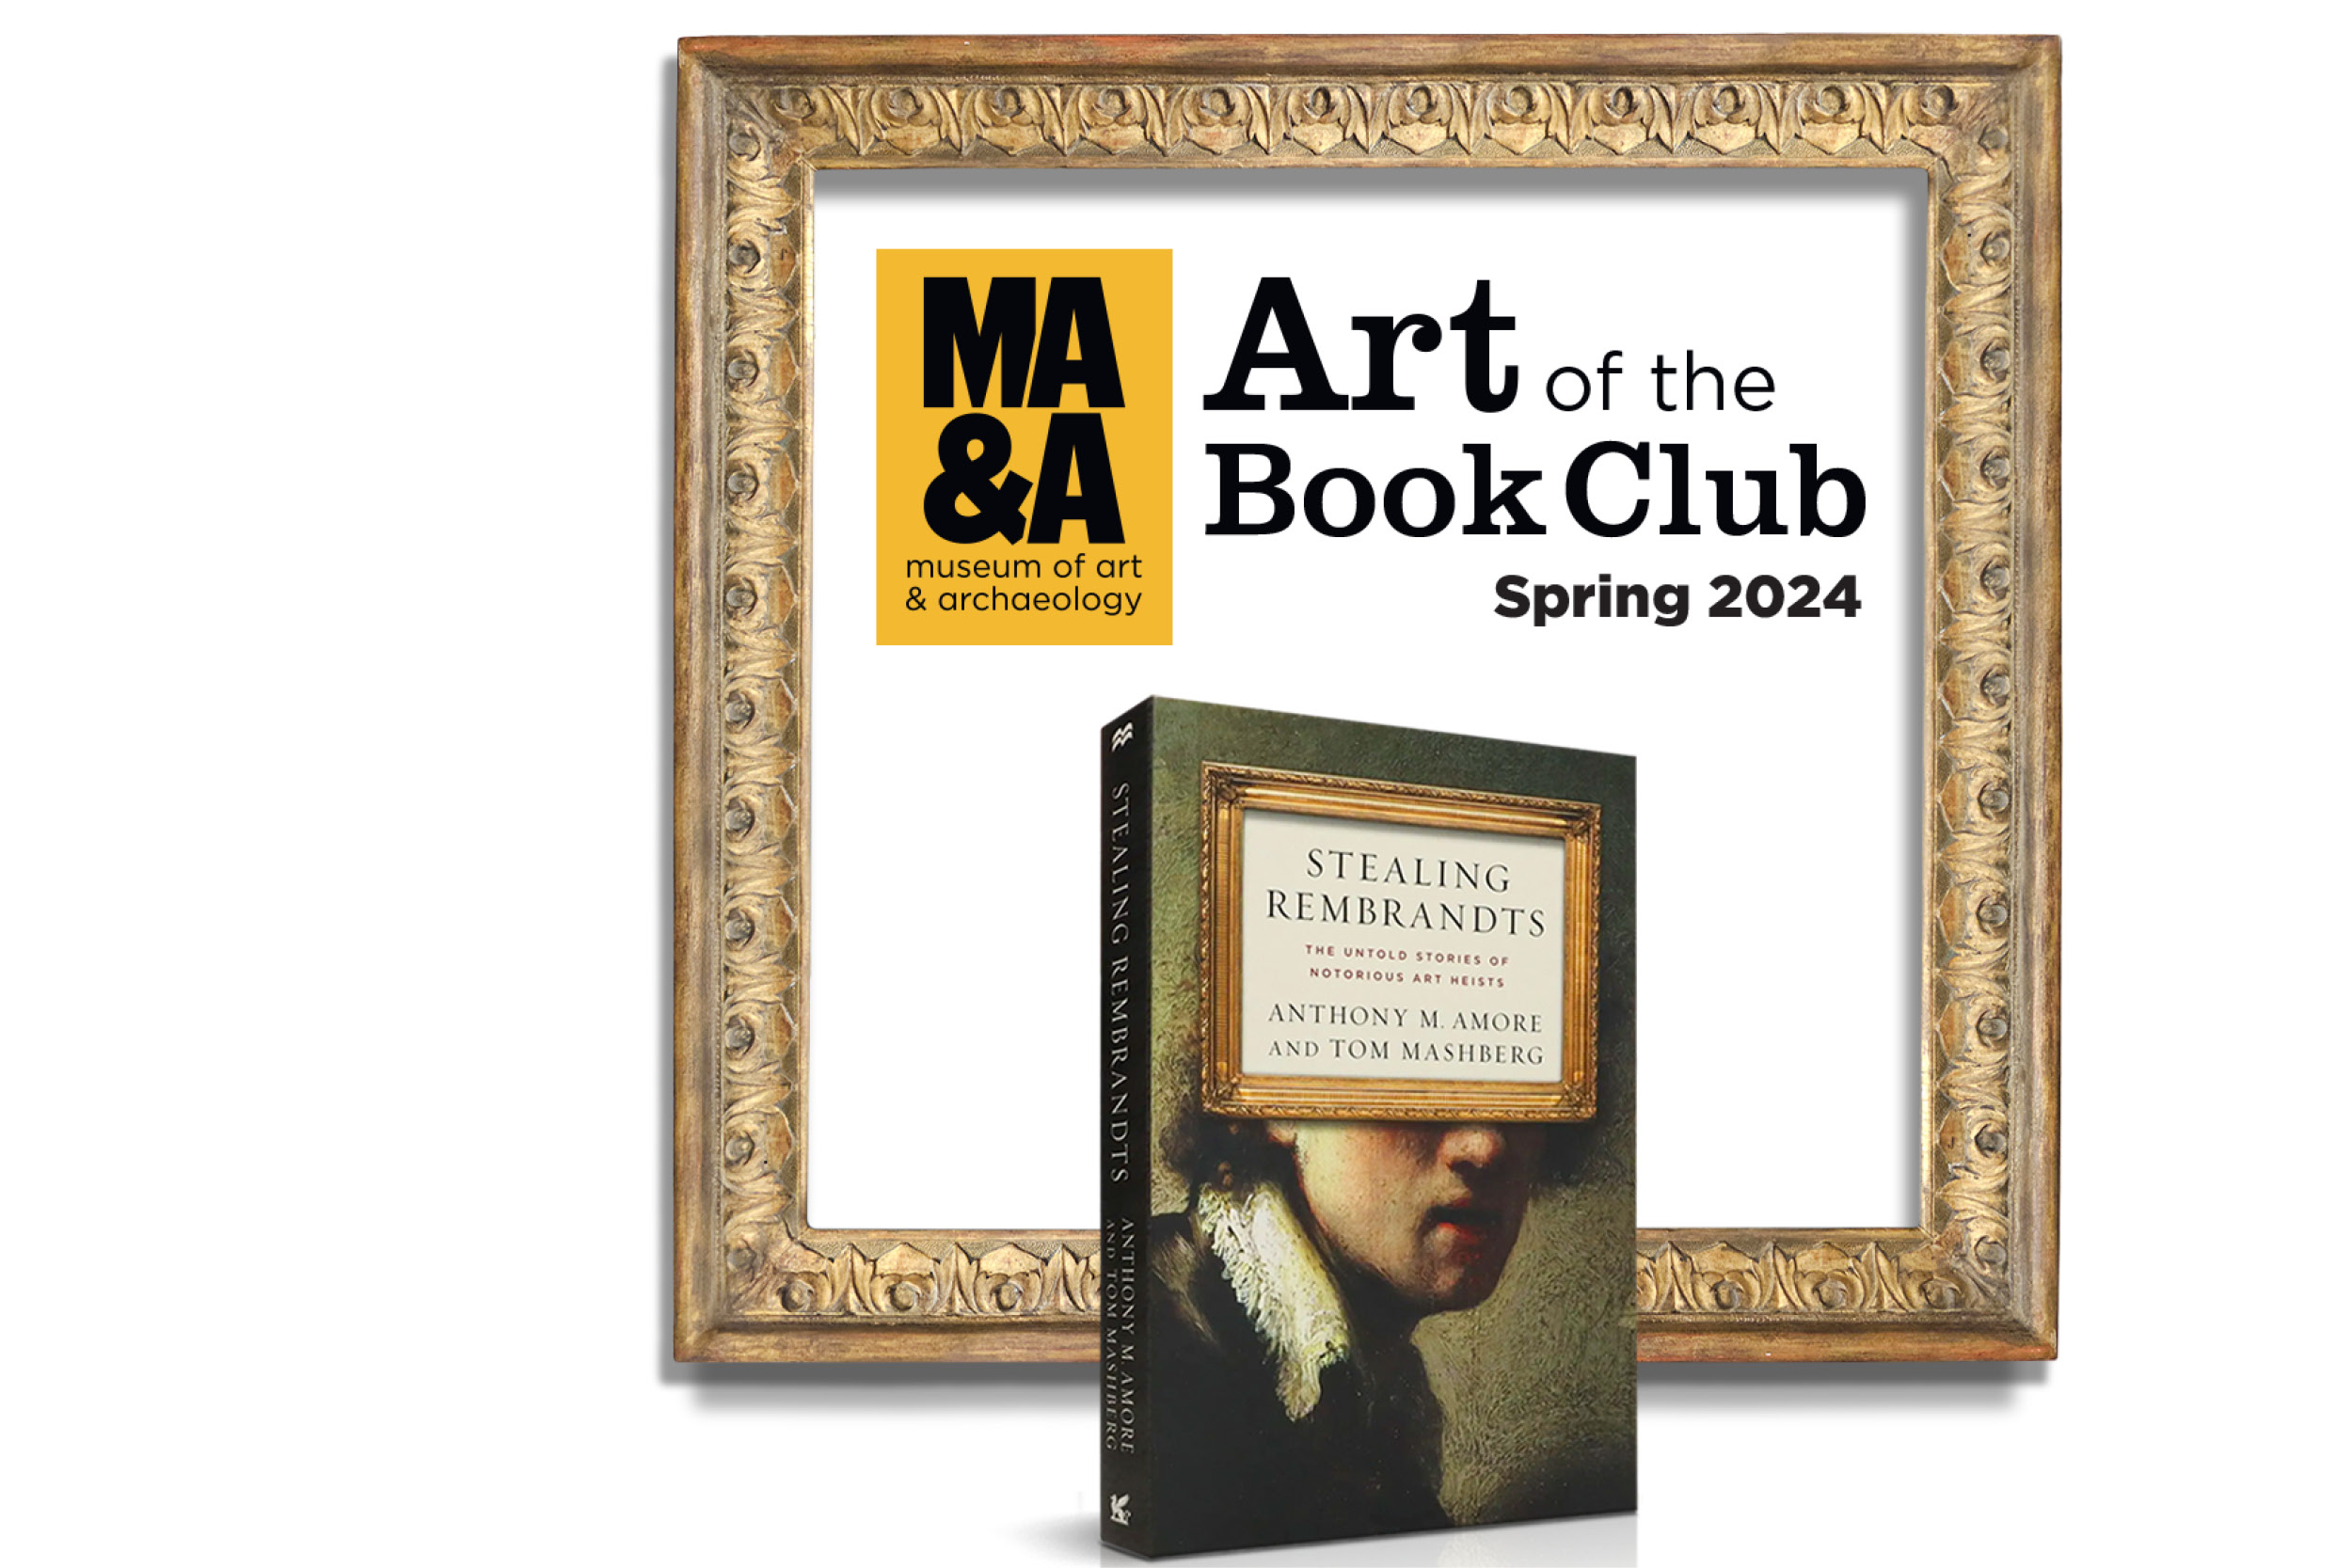 Art of the Book Club Spring 2024